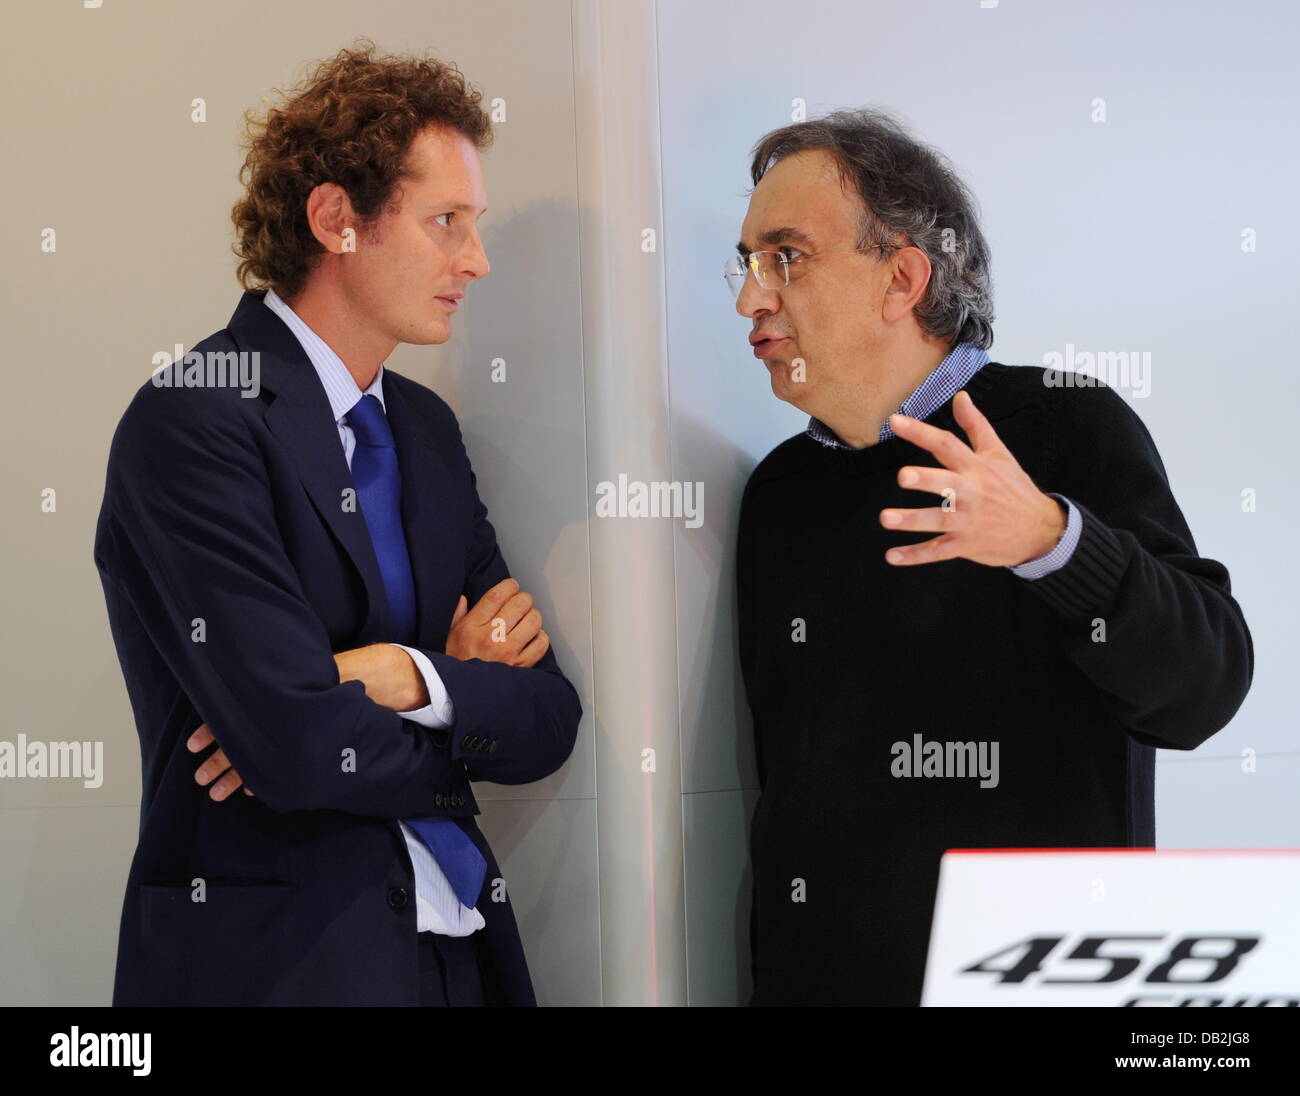 Fiat President John Elkann (L) and head of Fiat Sergio Marchionne talk during a press conference of the car manufacturer Ferrari at the International Motor Show IAA in Frankfurt Main, Germany, 13 September 2011. From 15 to 25 September 2011 exhibitors from all over the world will present new trends of the automotive industry, headed by electronic mobility and hybrid vehicles. Photo Stock Photo